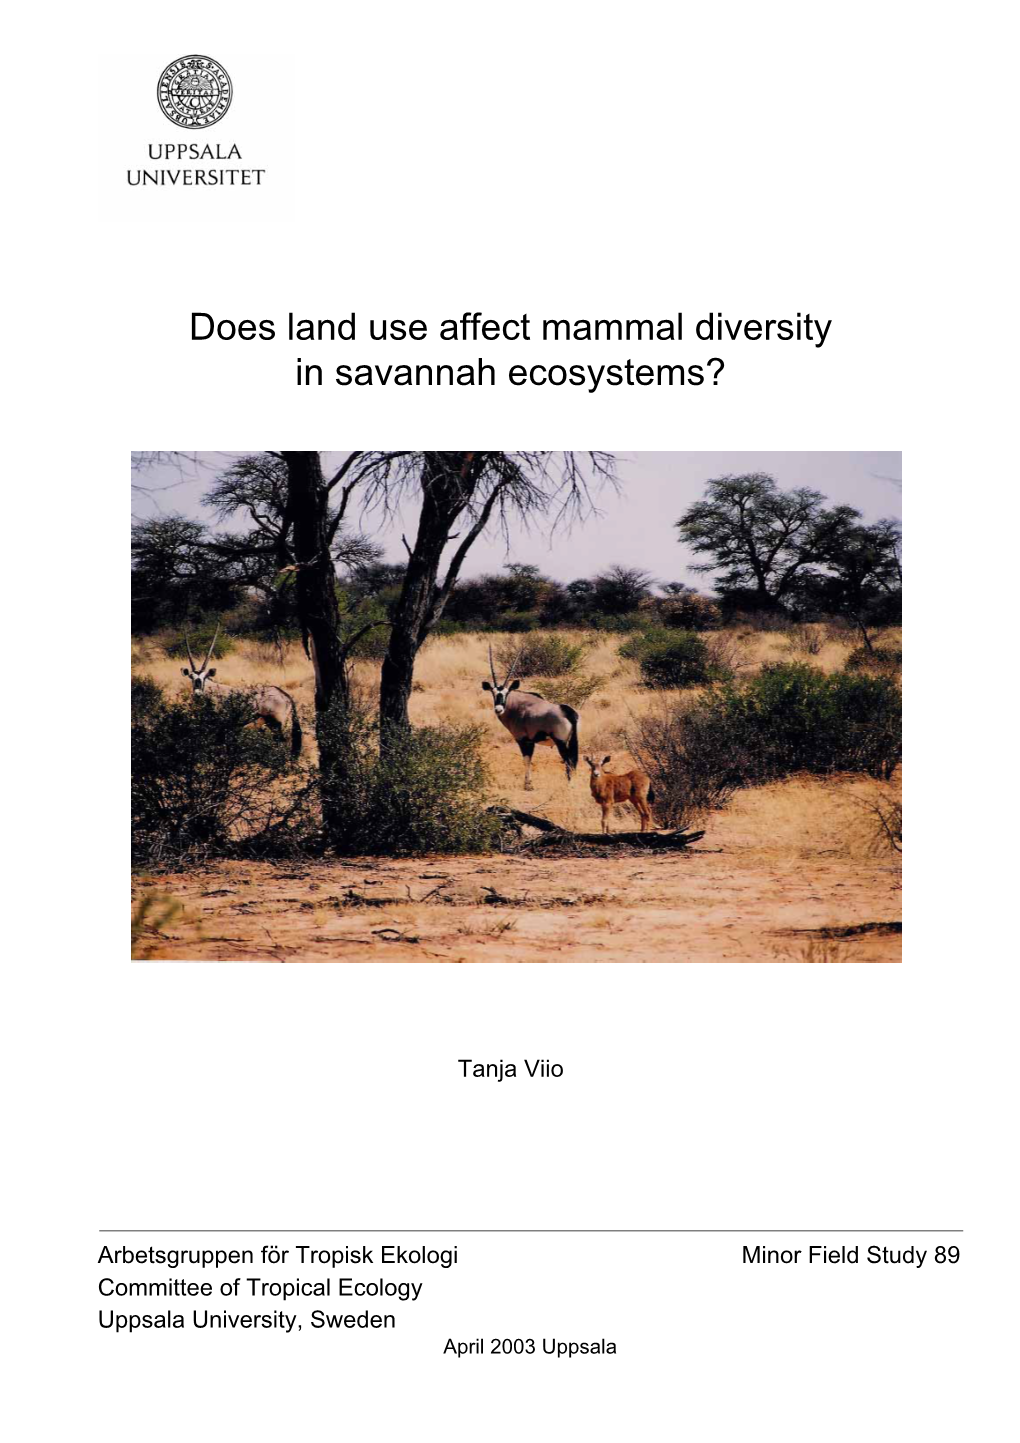 Does Land Use Affect Mammal Diversity in Savannah Ecosystems?